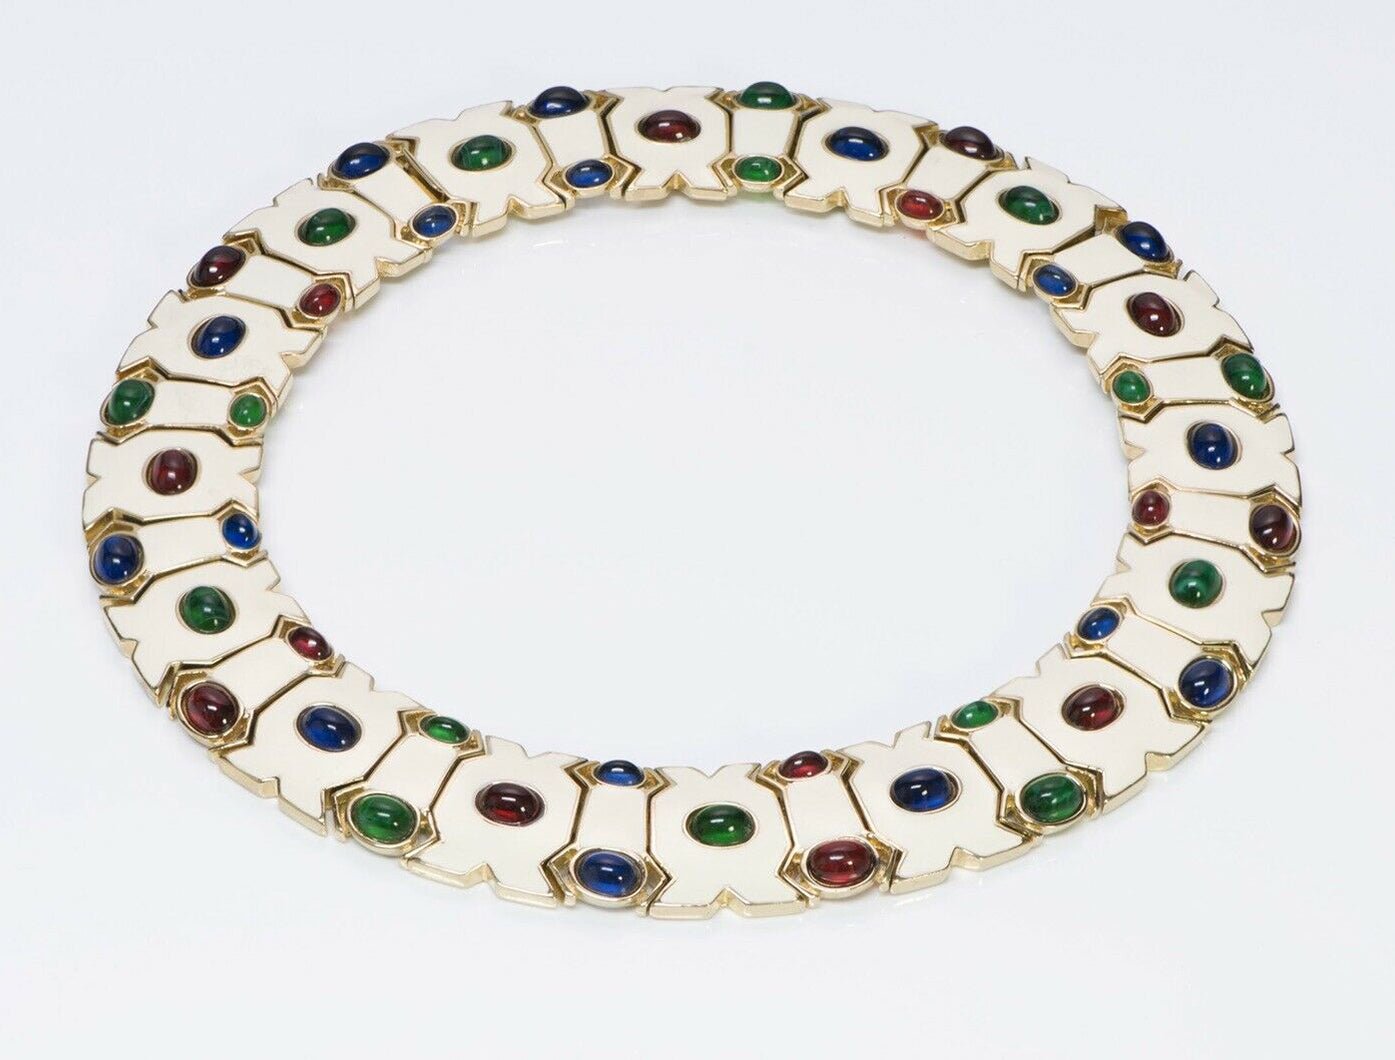 CINER Wide White Enamel Green Blue Red Cabochon Glass Collar Necklace